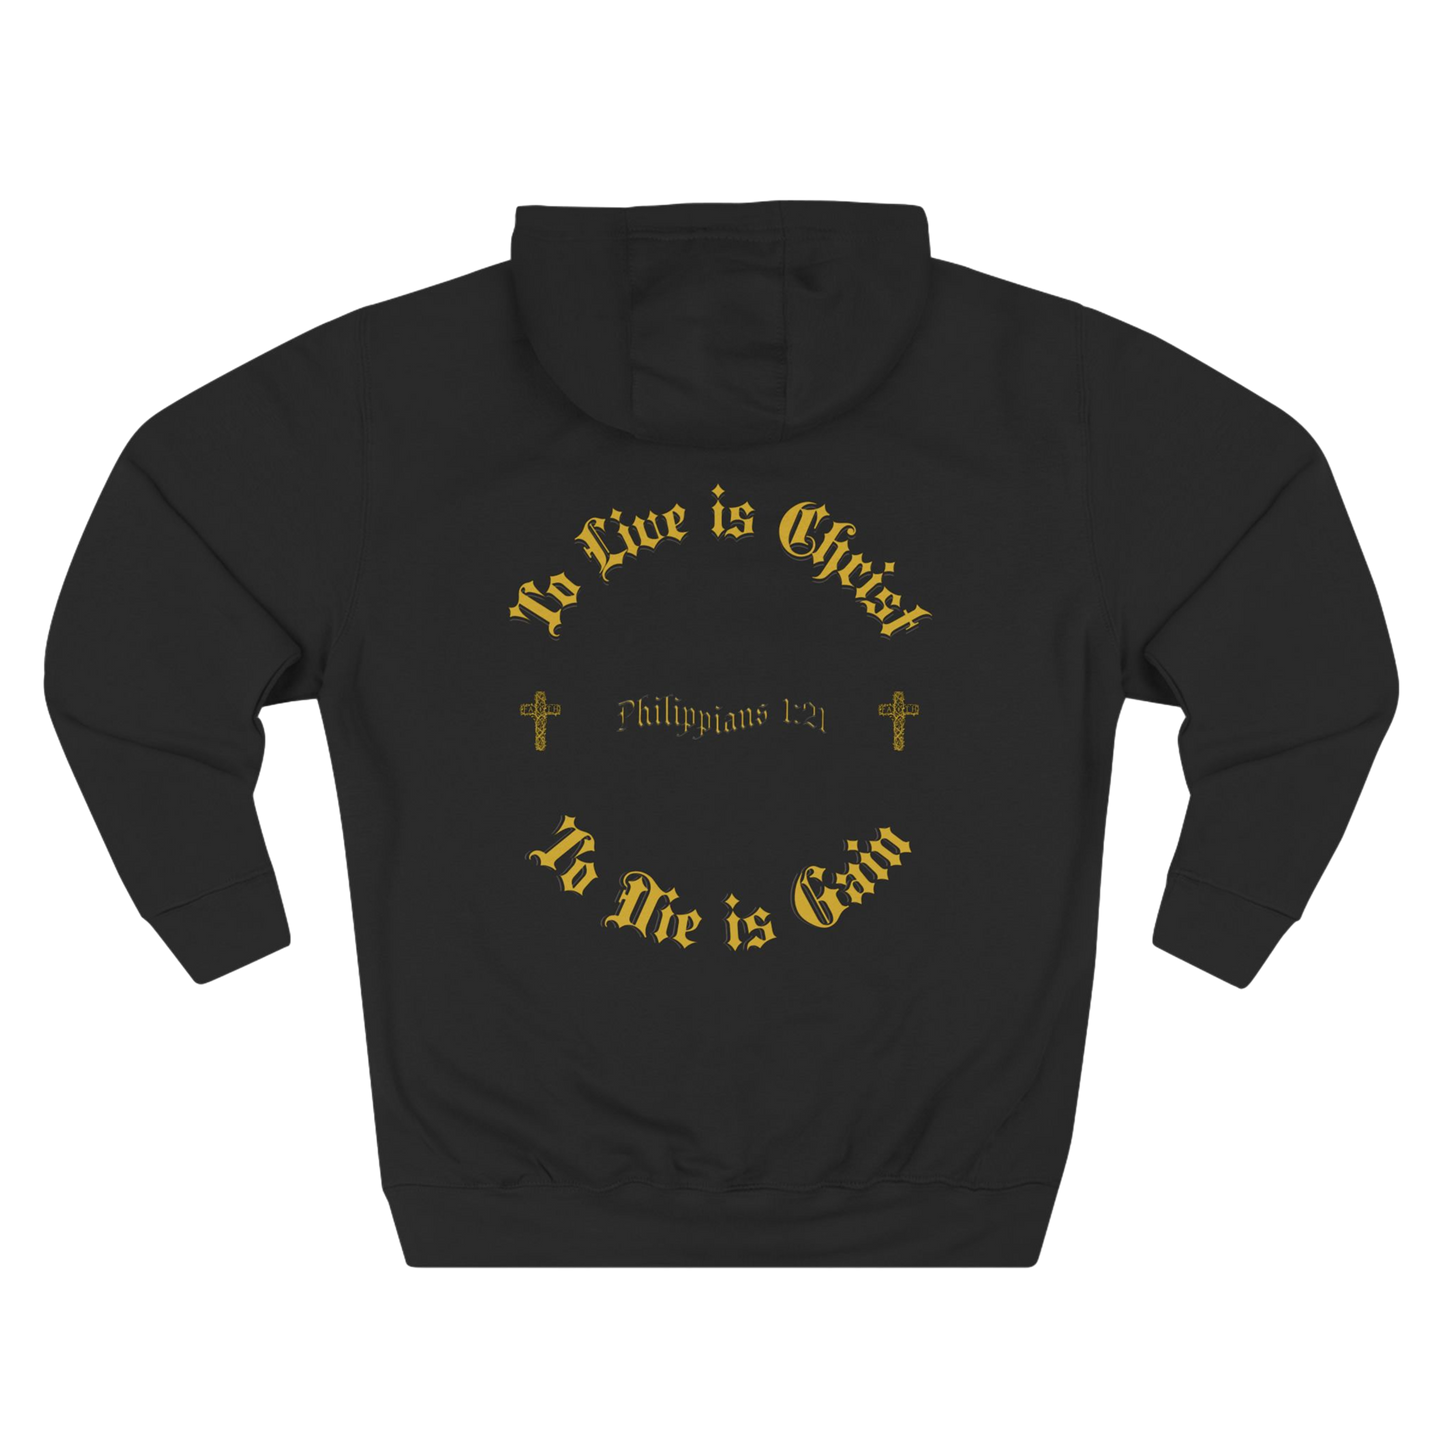 BoundlessFaith - To Live is Christ, To Die is Gain - Christian Apparel Hoodie BLACK - TRUE Apparel of God